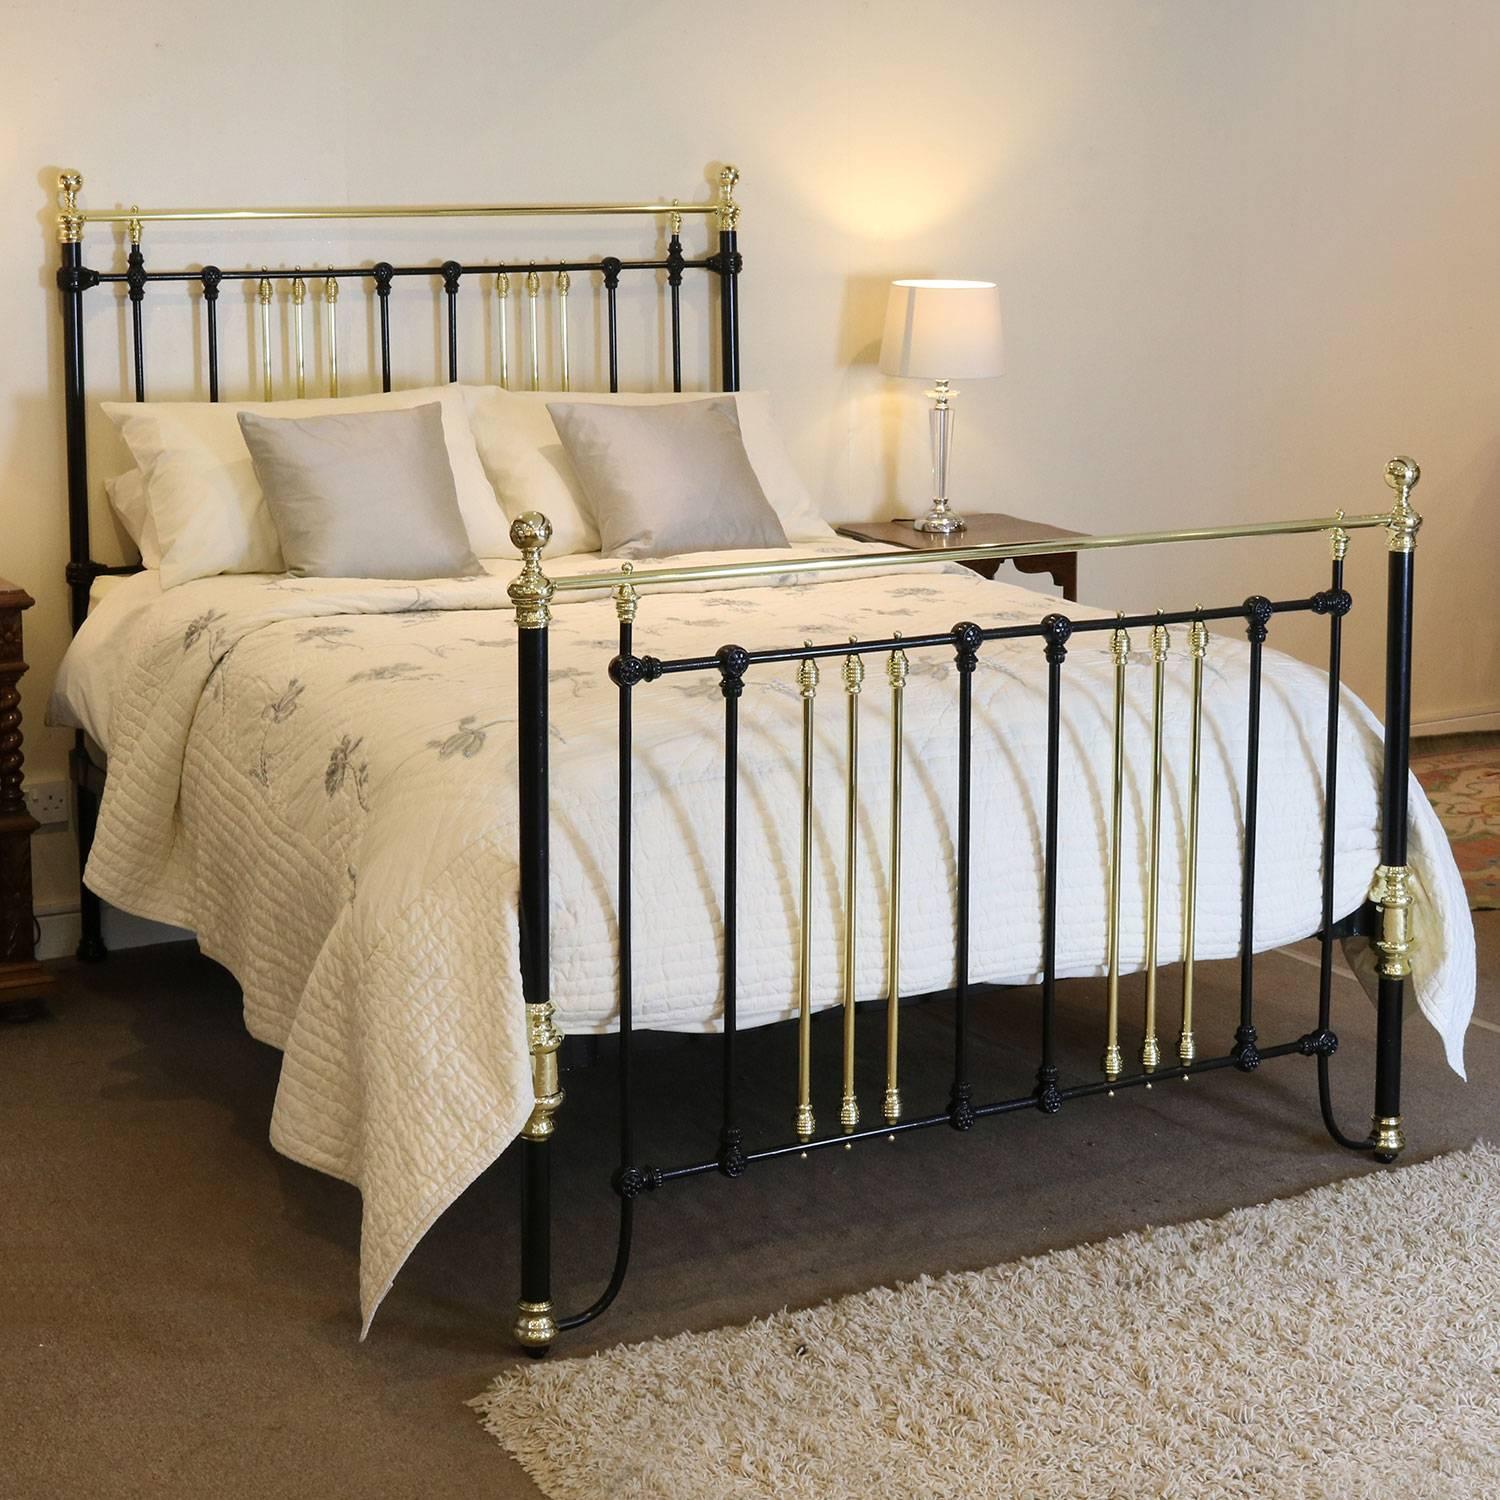 A fine brass and iron bed adapted from an original Victorian frame and finished in black with groups of three brass down bars and brass kneecaps.

This bed accepts a British king-size or American queen-size (60 inches, 5ft or 150cm) base and